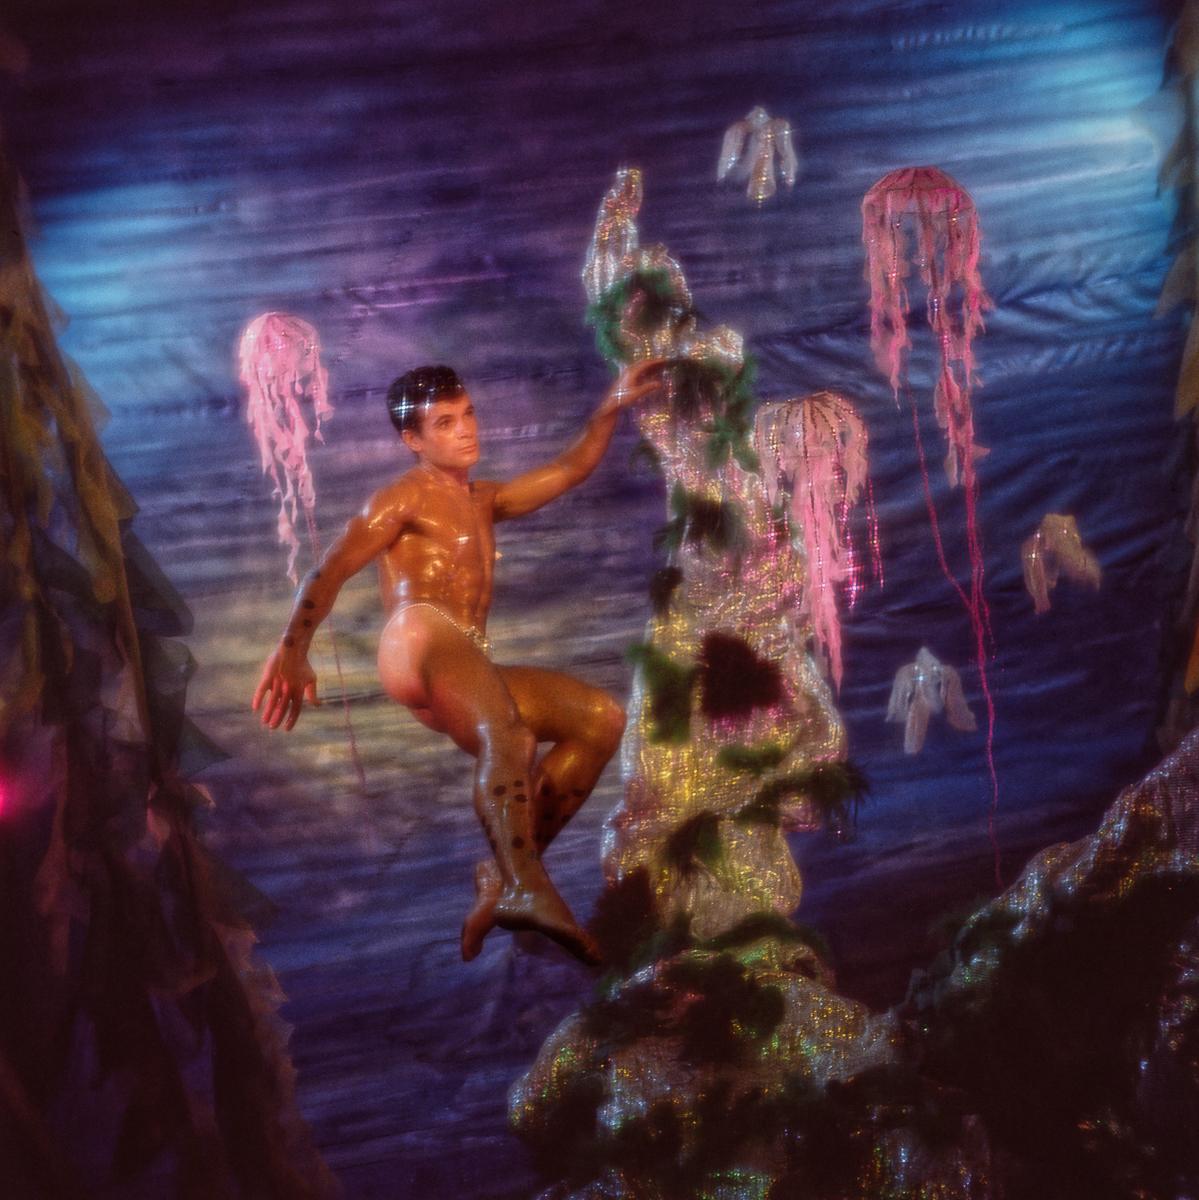 Underwater with Jellyfish - Photograph by James Bidgood